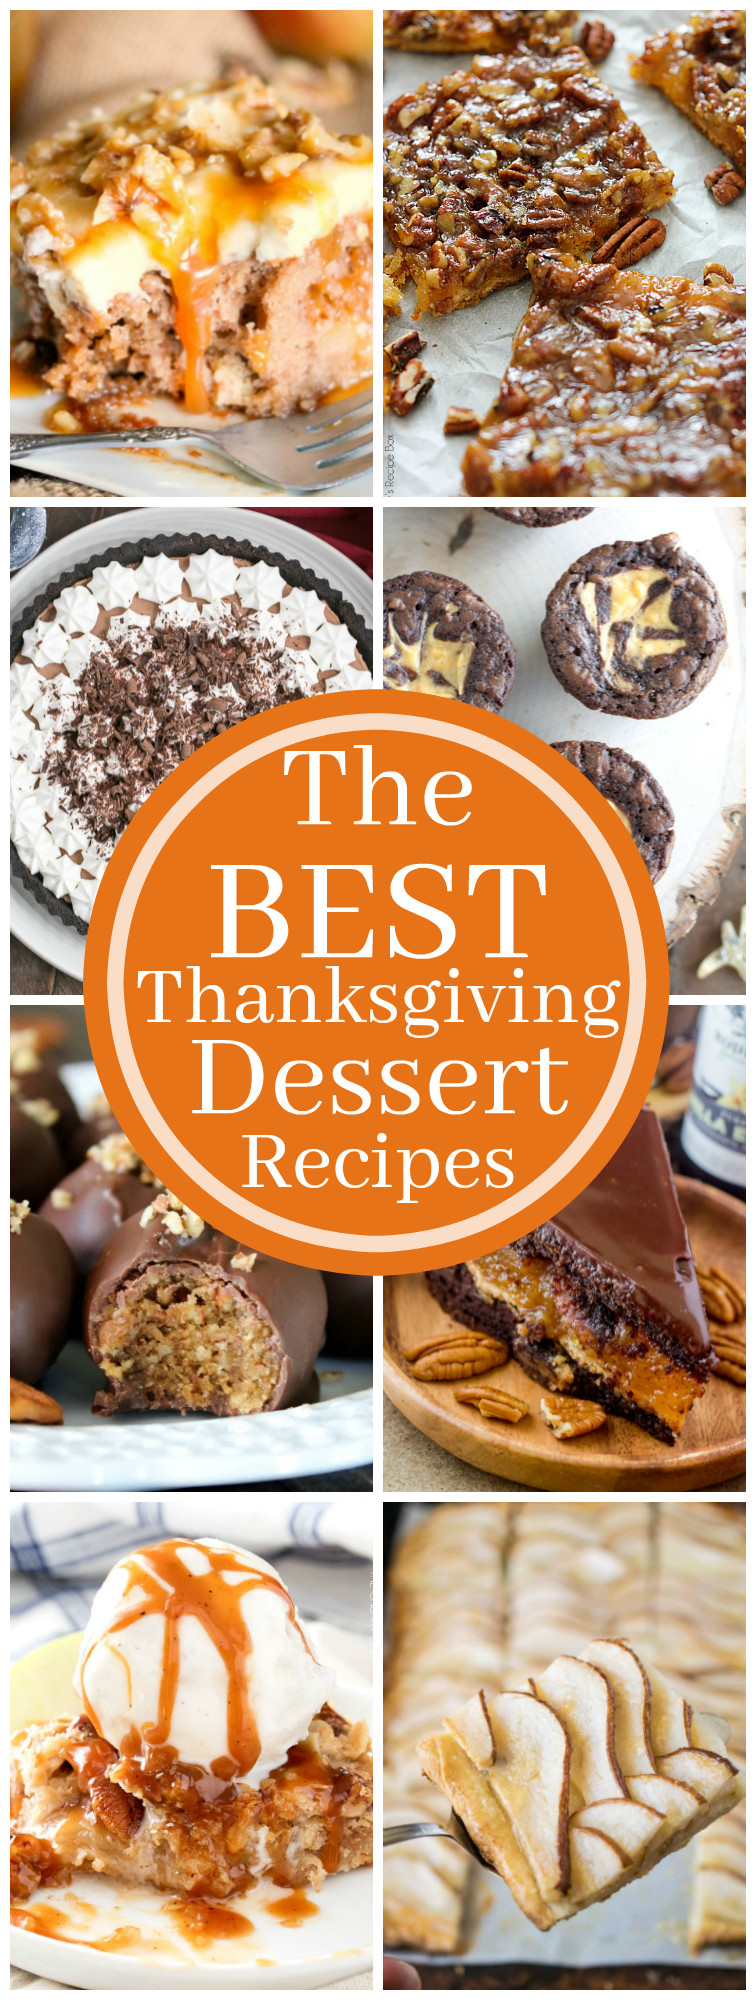 Top Thanksgiving Pies
 The Best Thanksgiving Desserts Savory Experiments